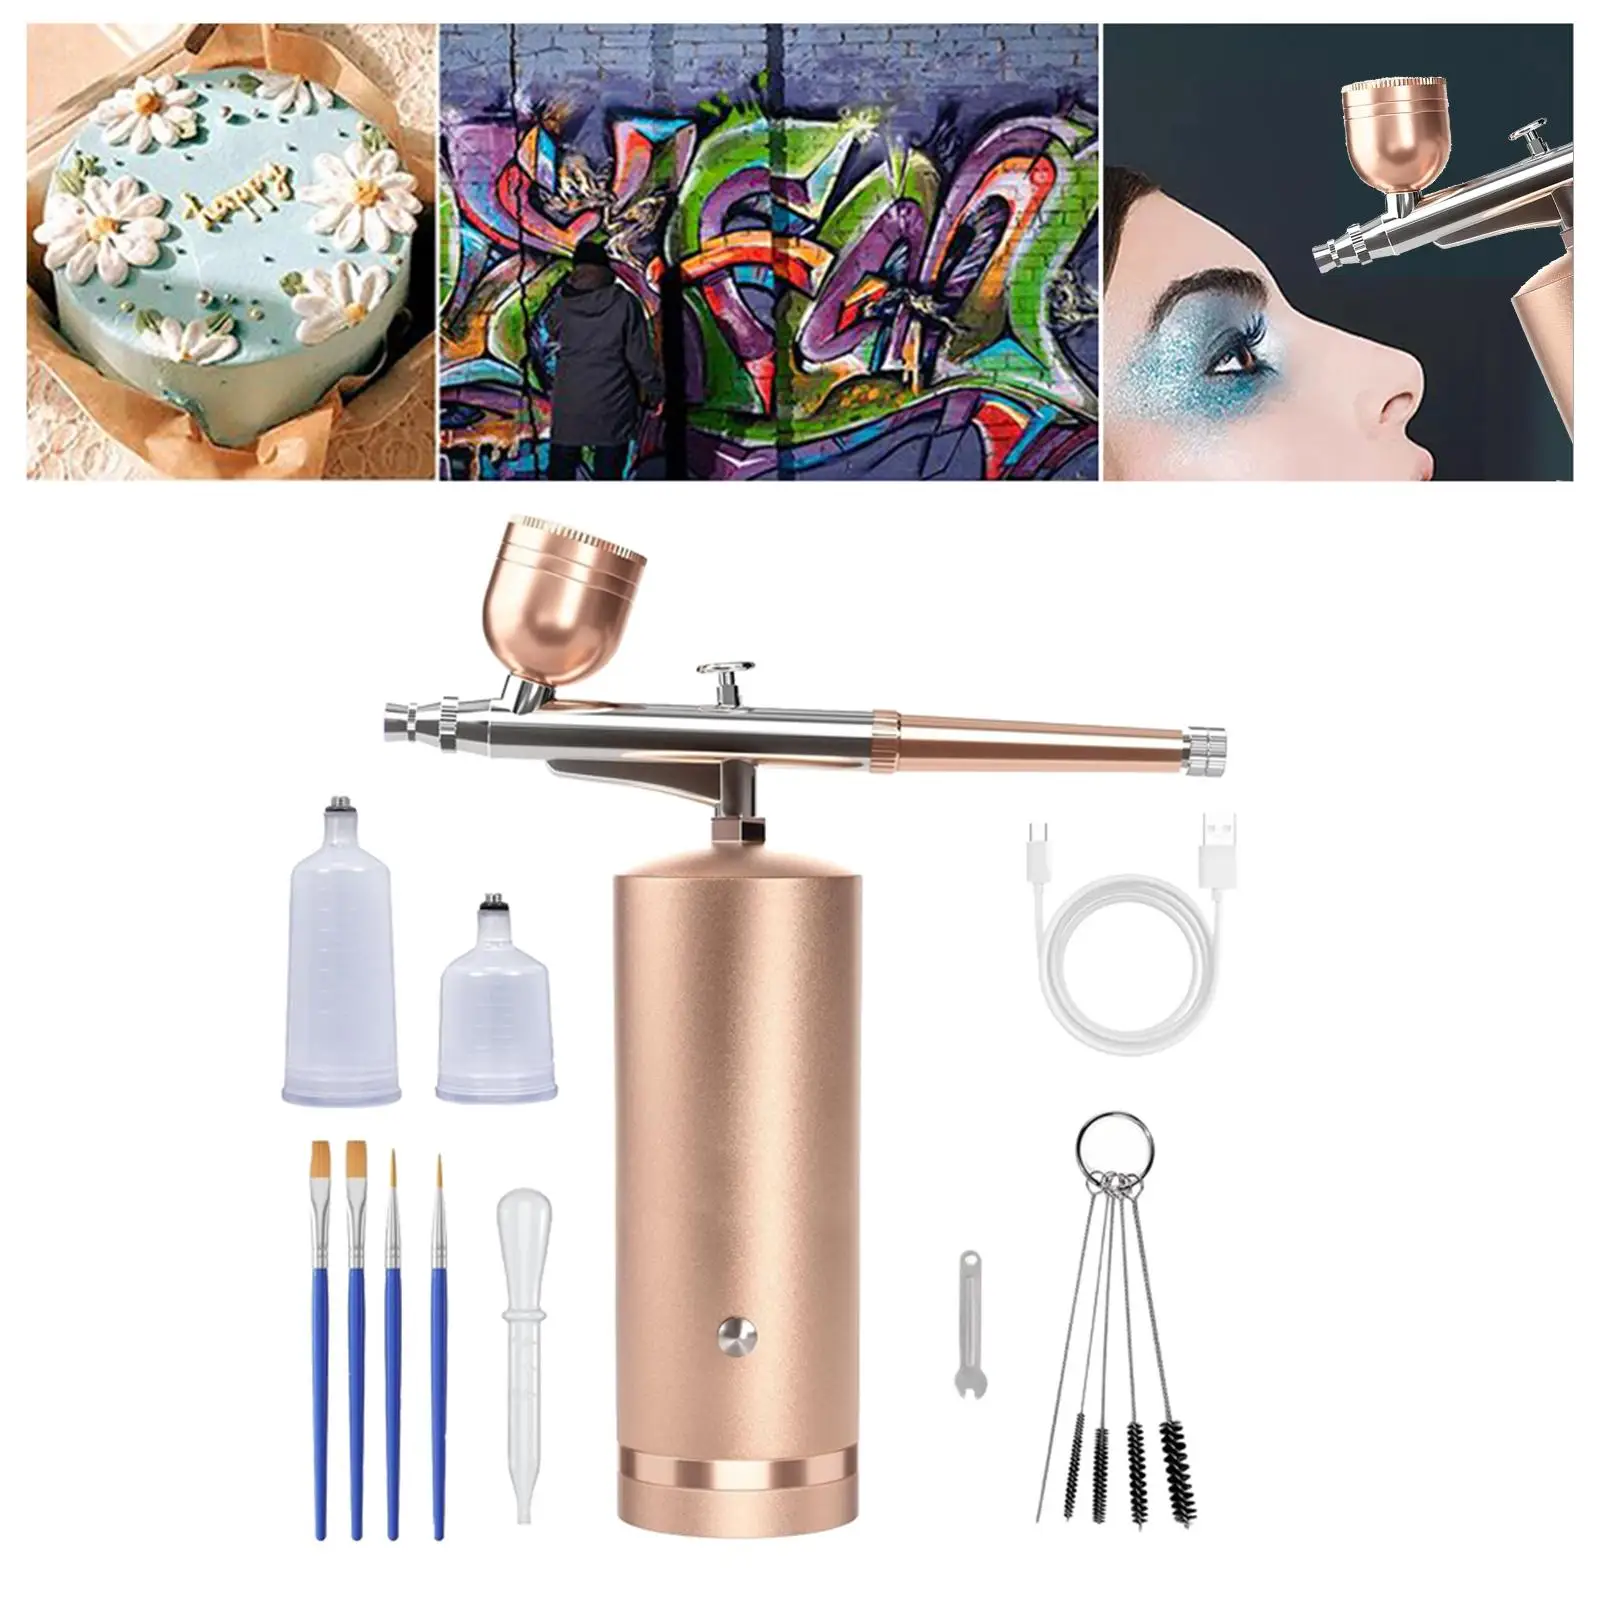 Airbrush Kits with Compressor Barber Airbrush Compressor for Nail Art Clothes Coloring Craft Hobby Cakes Decor Model Painting